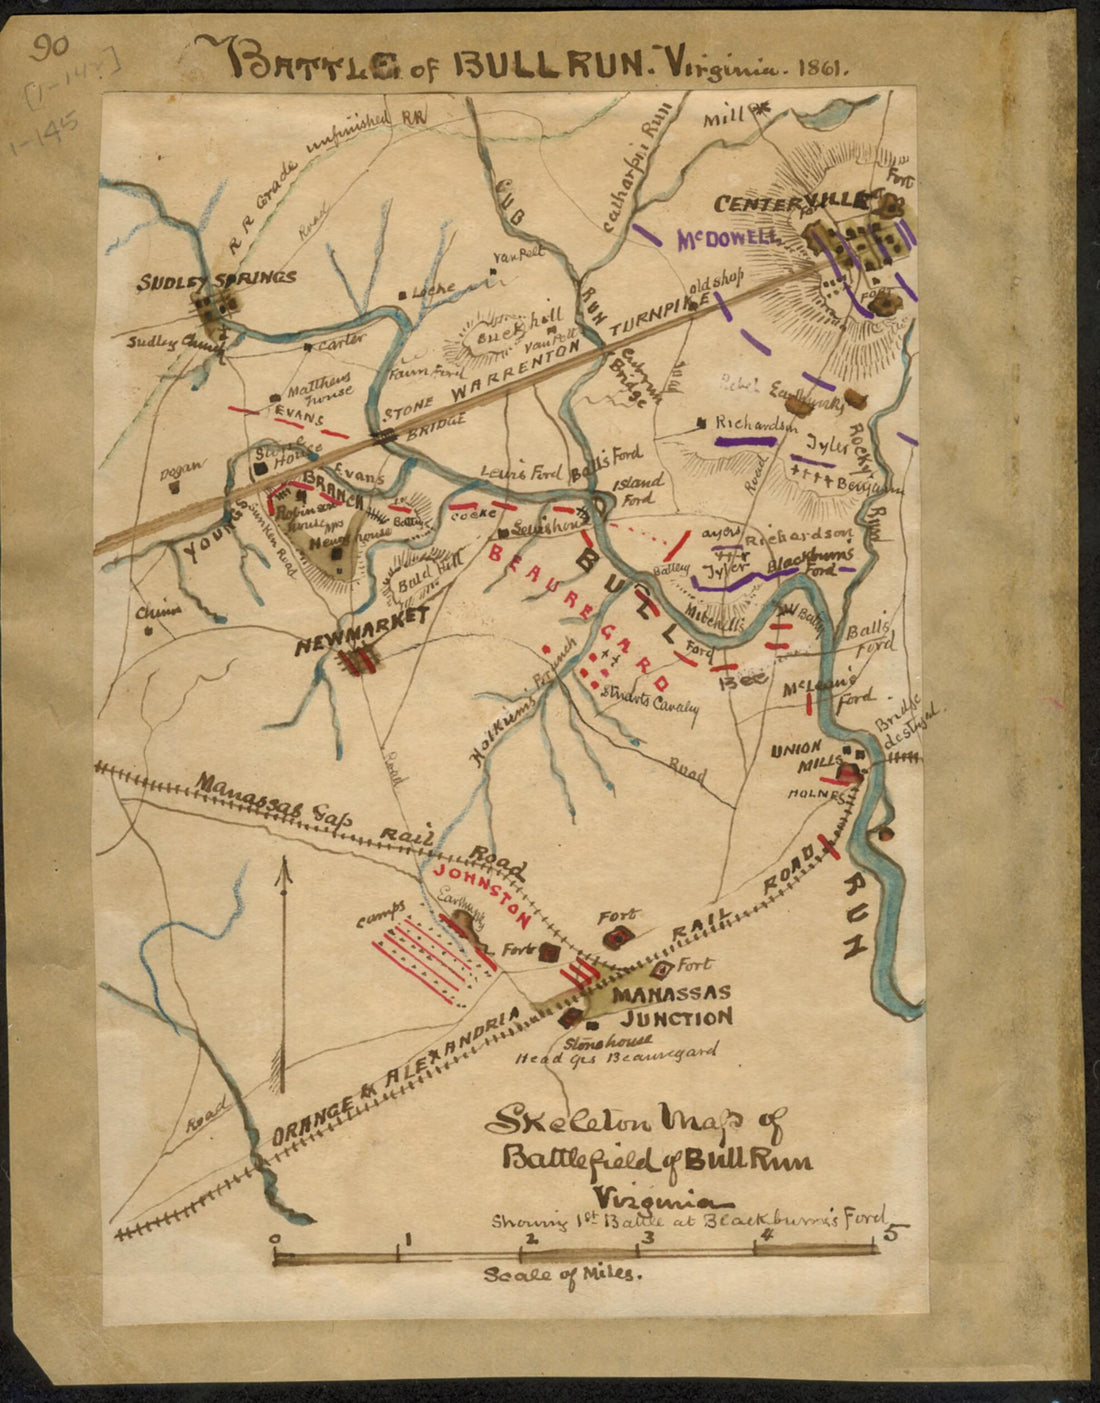 This old map of Skeleton Map of Battlefield of Bull Run Virginia : Showing 1st Battle at Blackburn&